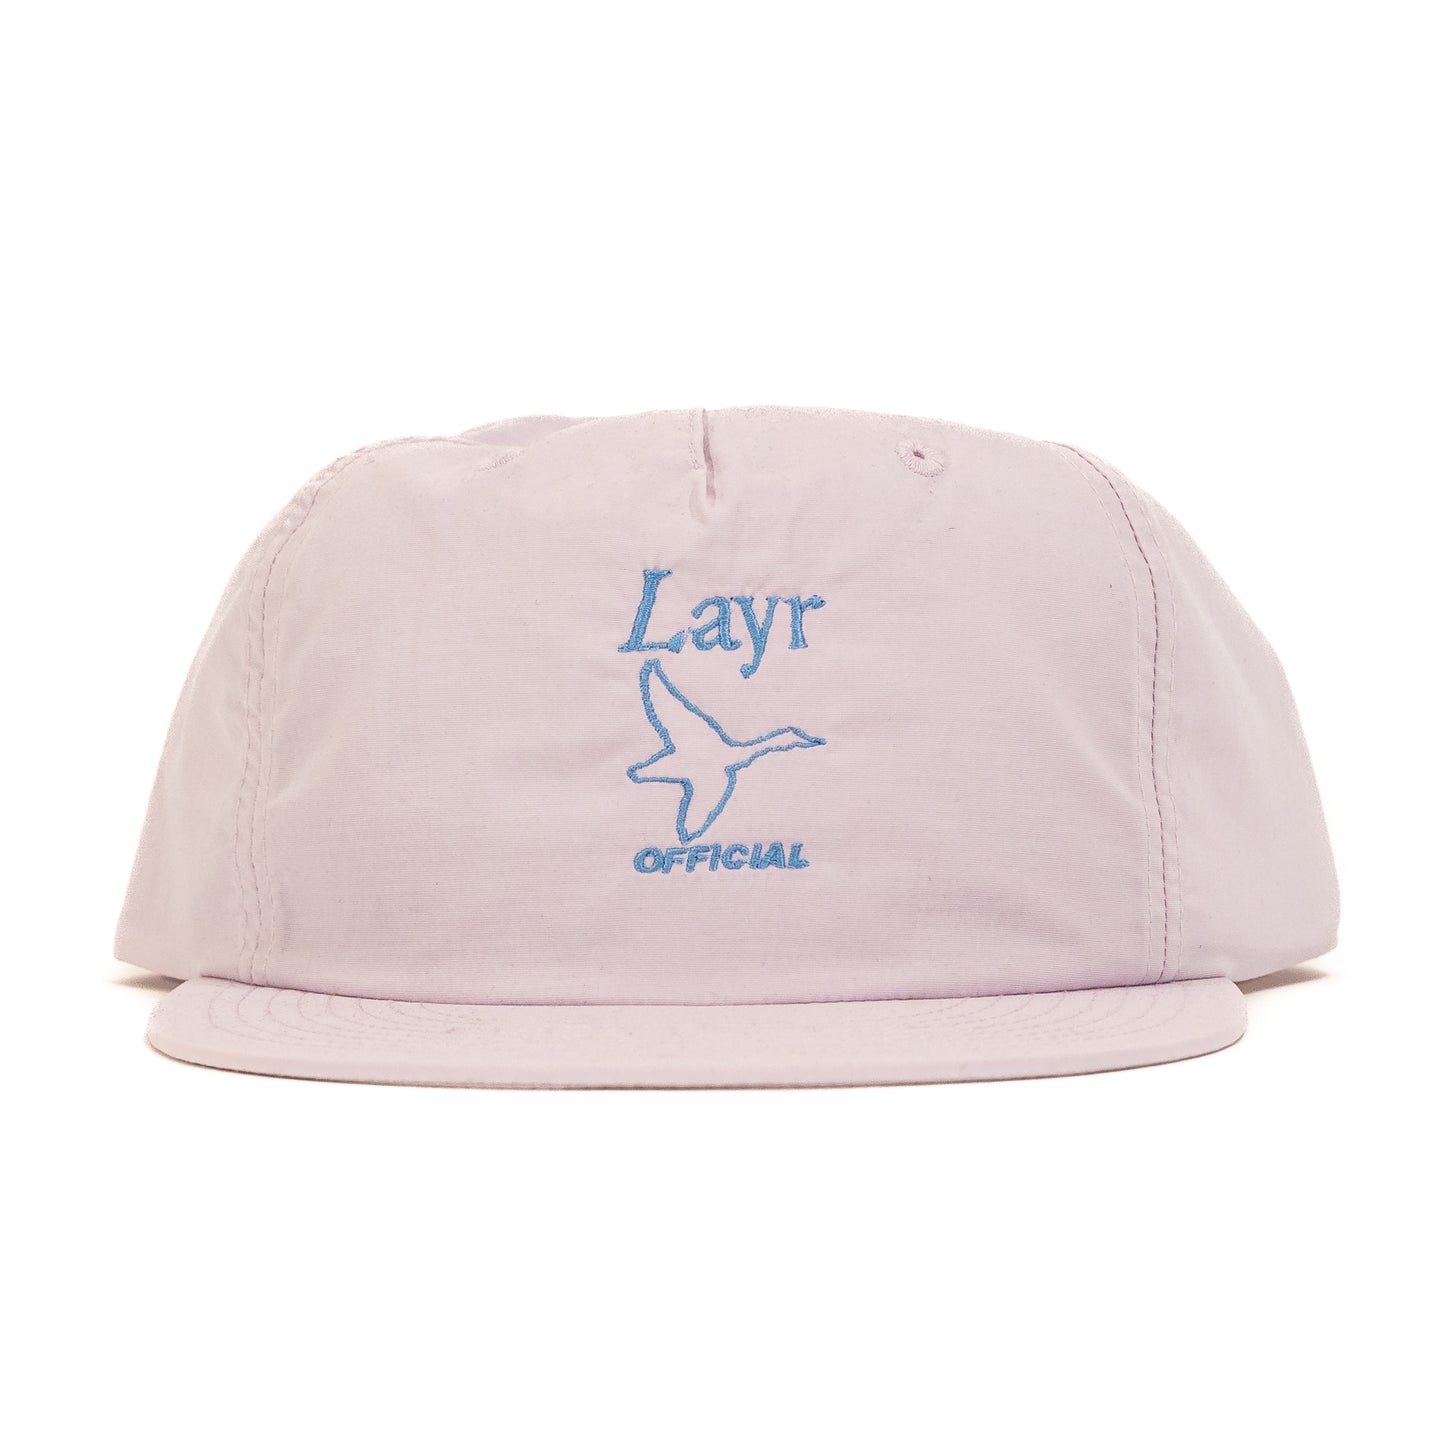 Flying Duck Surf Hat, Orchid - Layr Official